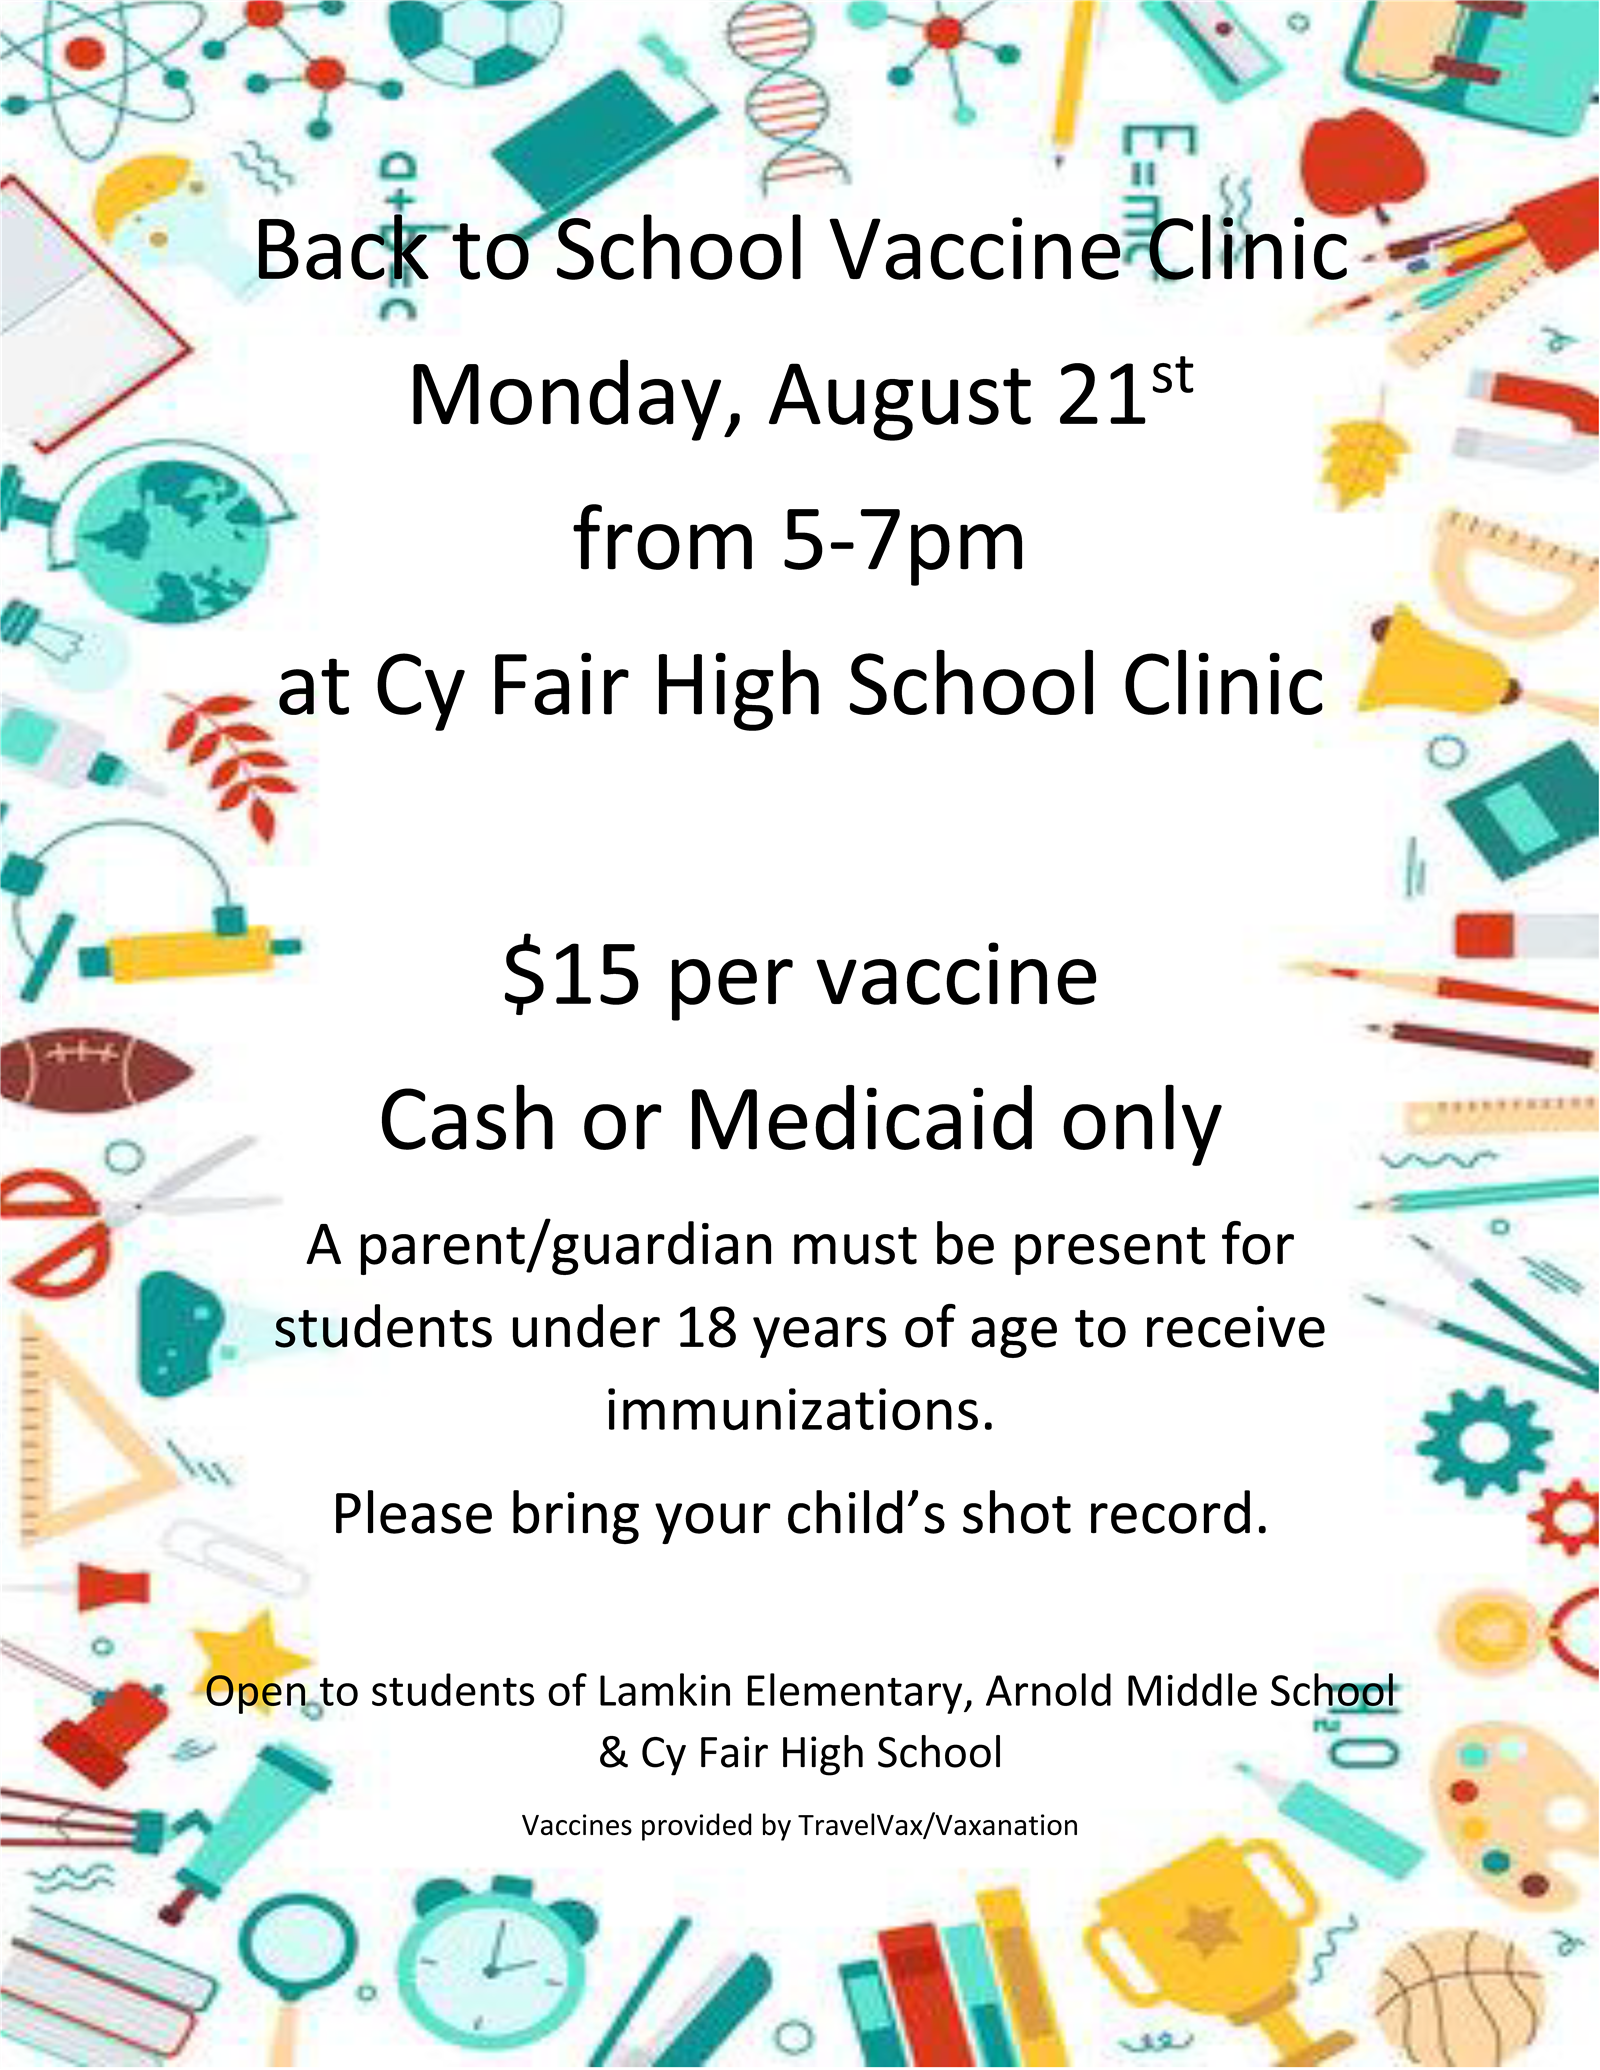 Back to school vaccine clinic 8/21 5-7pm at CyFair HS, $15/vaccine cash or medicaid only